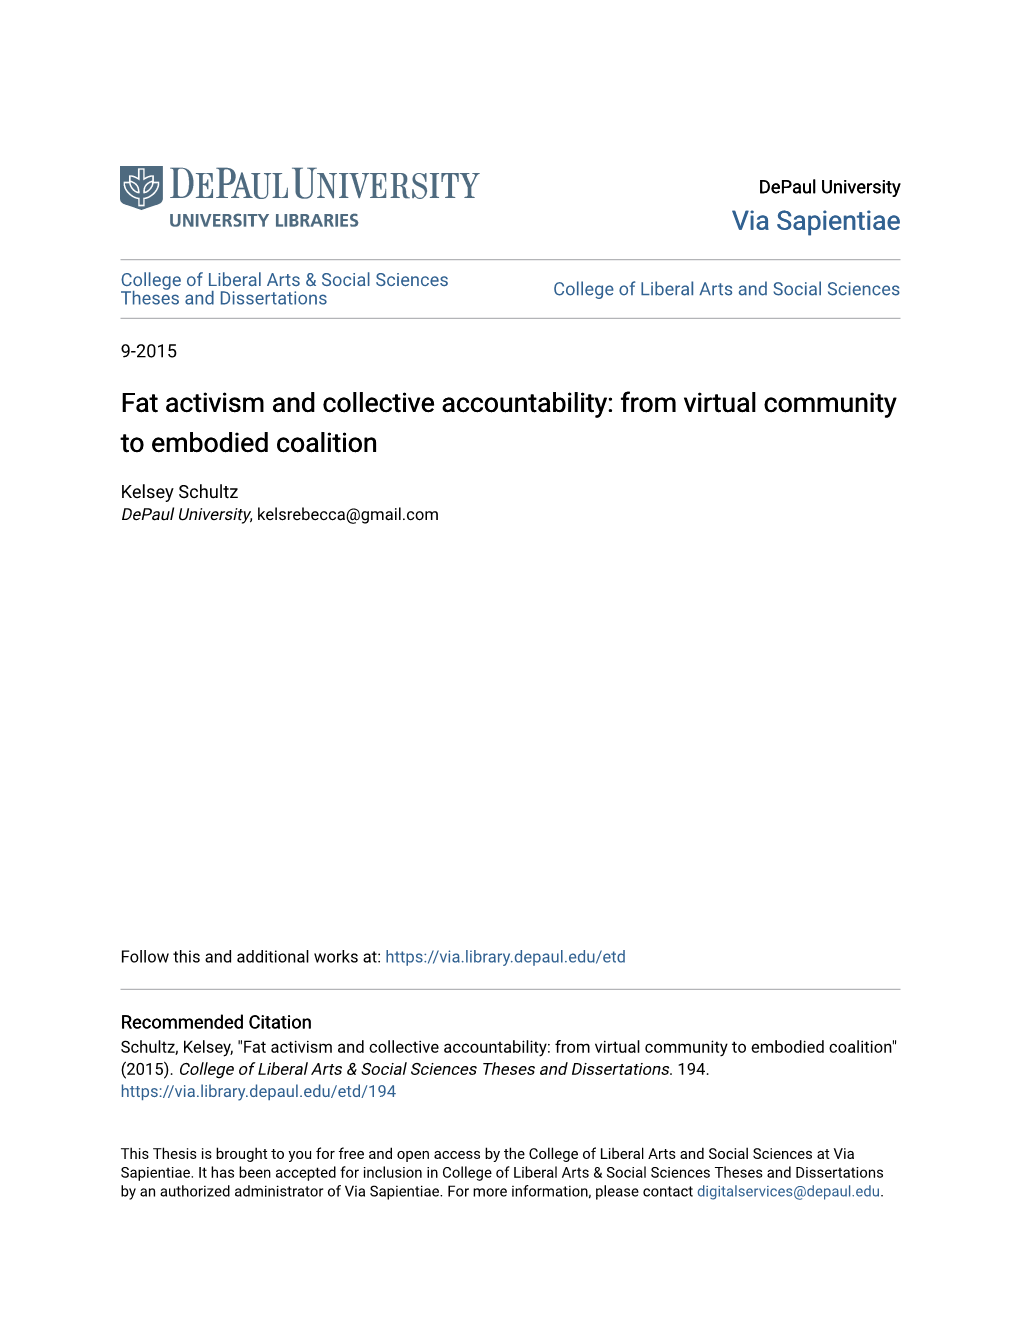 Fat Activism and Collective Accountability: from Virtual Community to Embodied Coalition